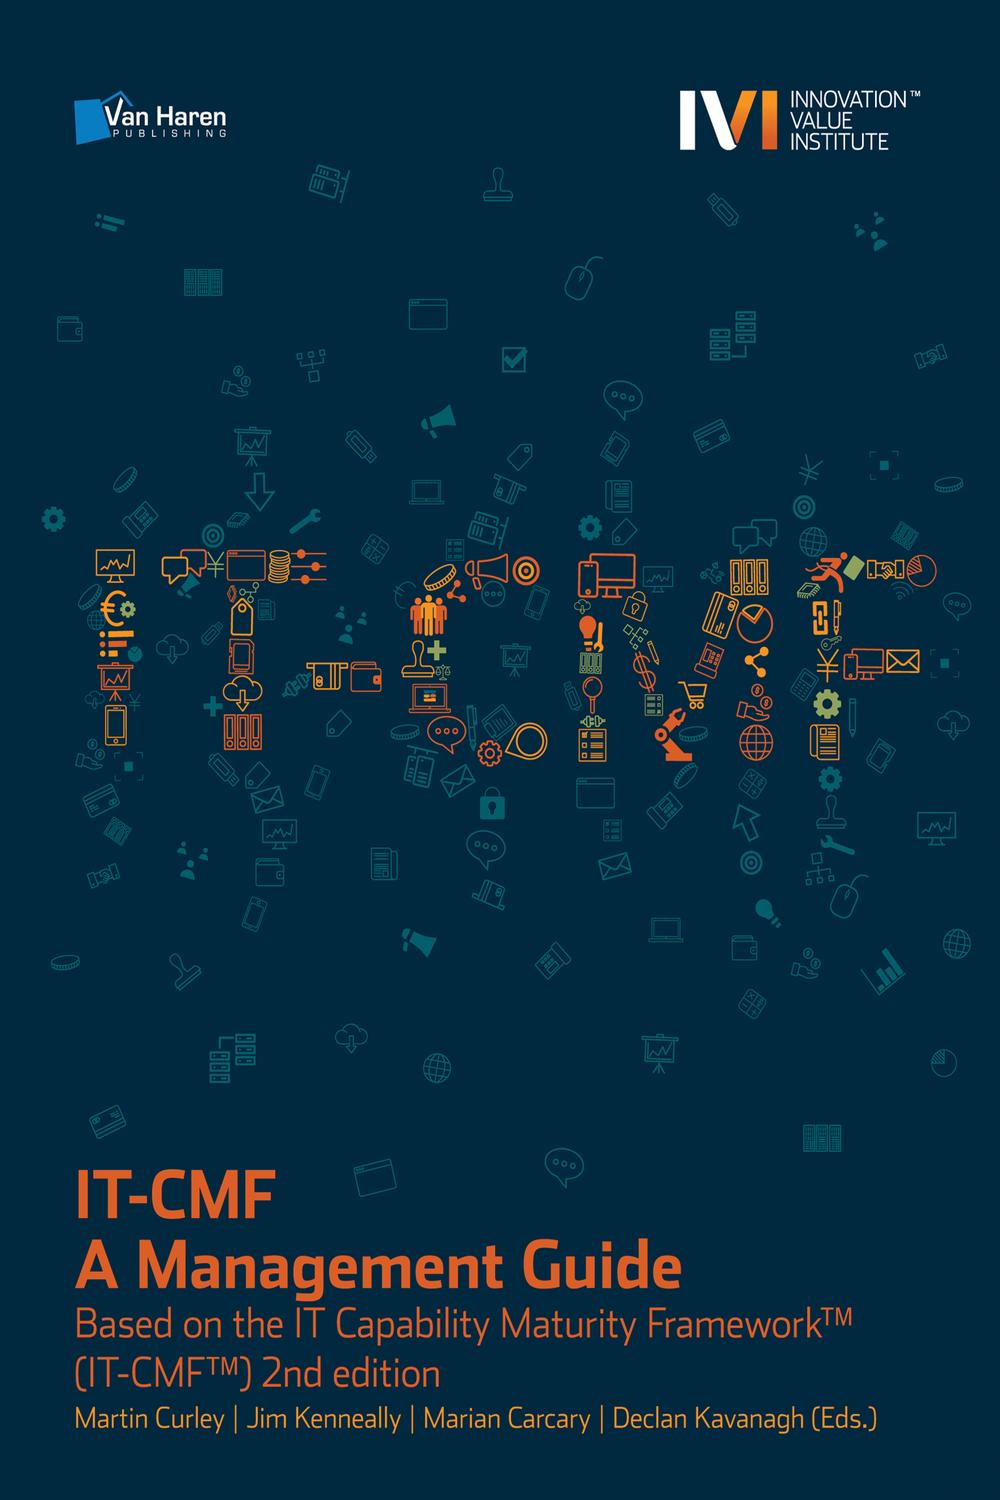 IT-CMF – A Management Guide - Based on the IT Capability Maturity Framework™ (IT-CMF™) 2nd edition - Martin Curley, Jim Kenneally, Marian Carcary